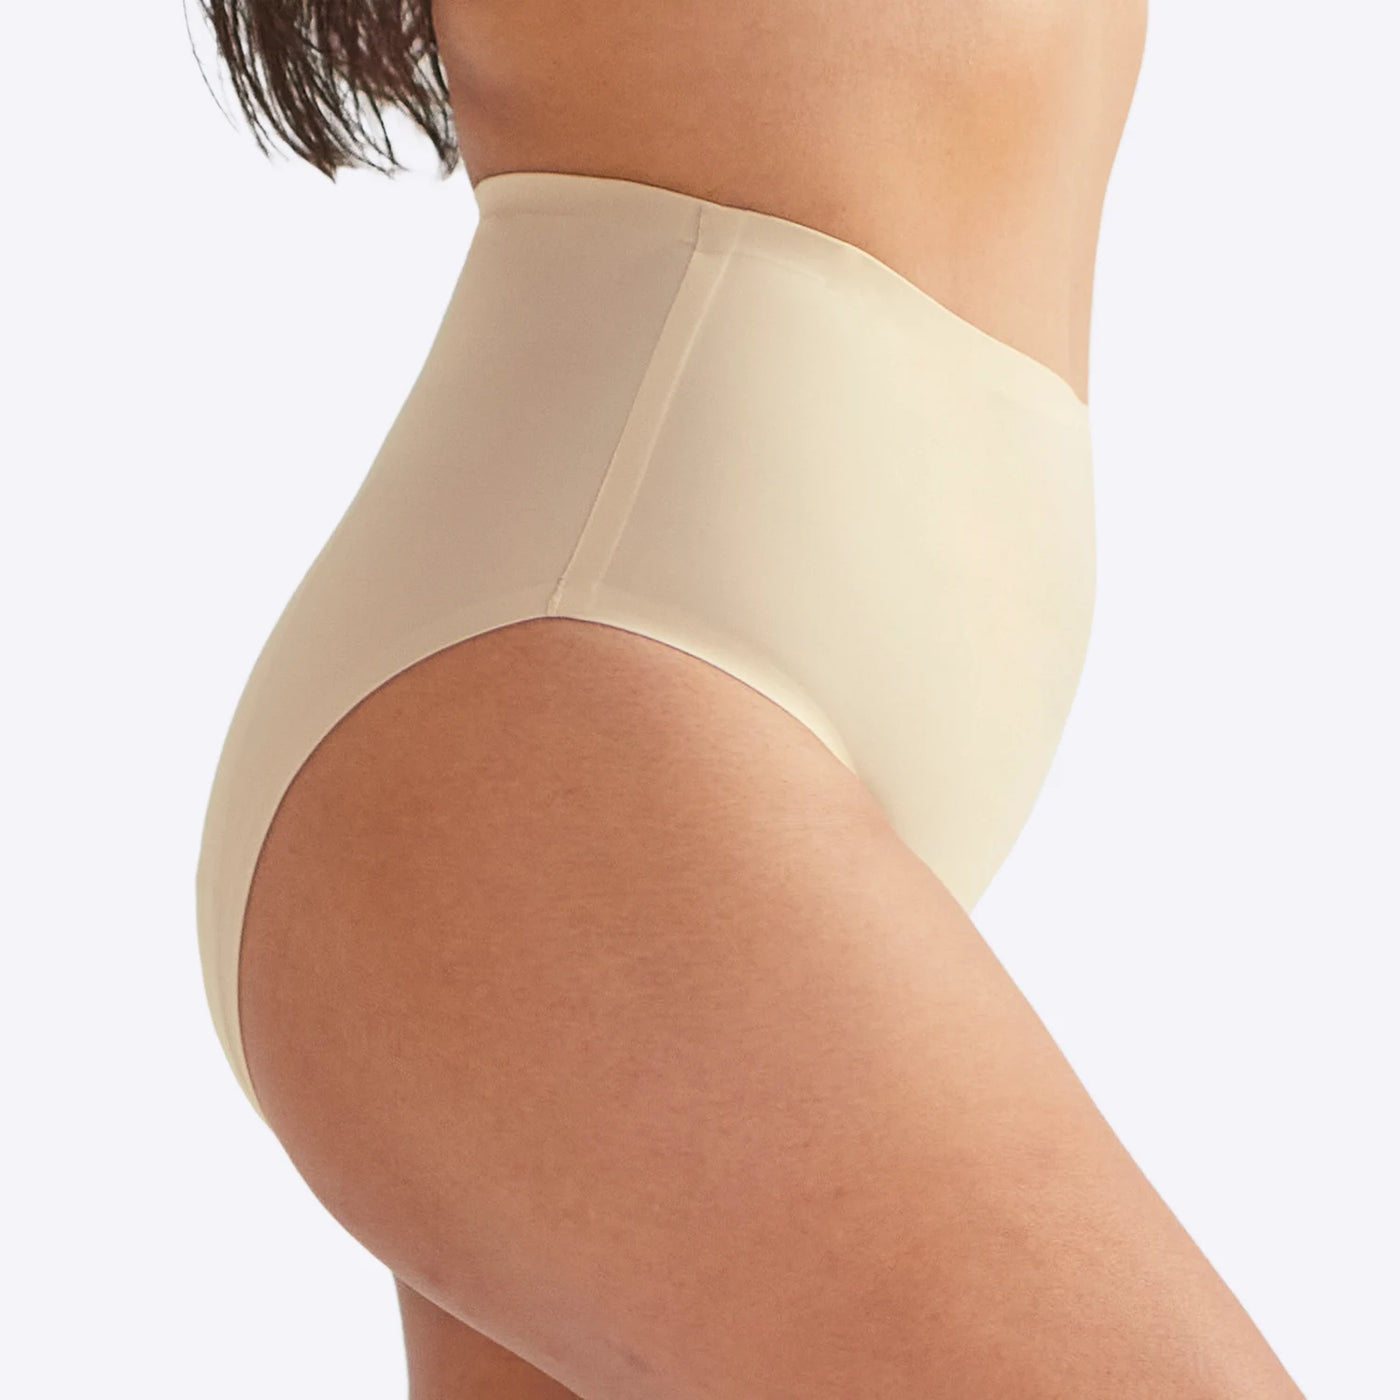 WUKA Drytech Midi Brief Incontinence Pants Style Light Nude Colour Side